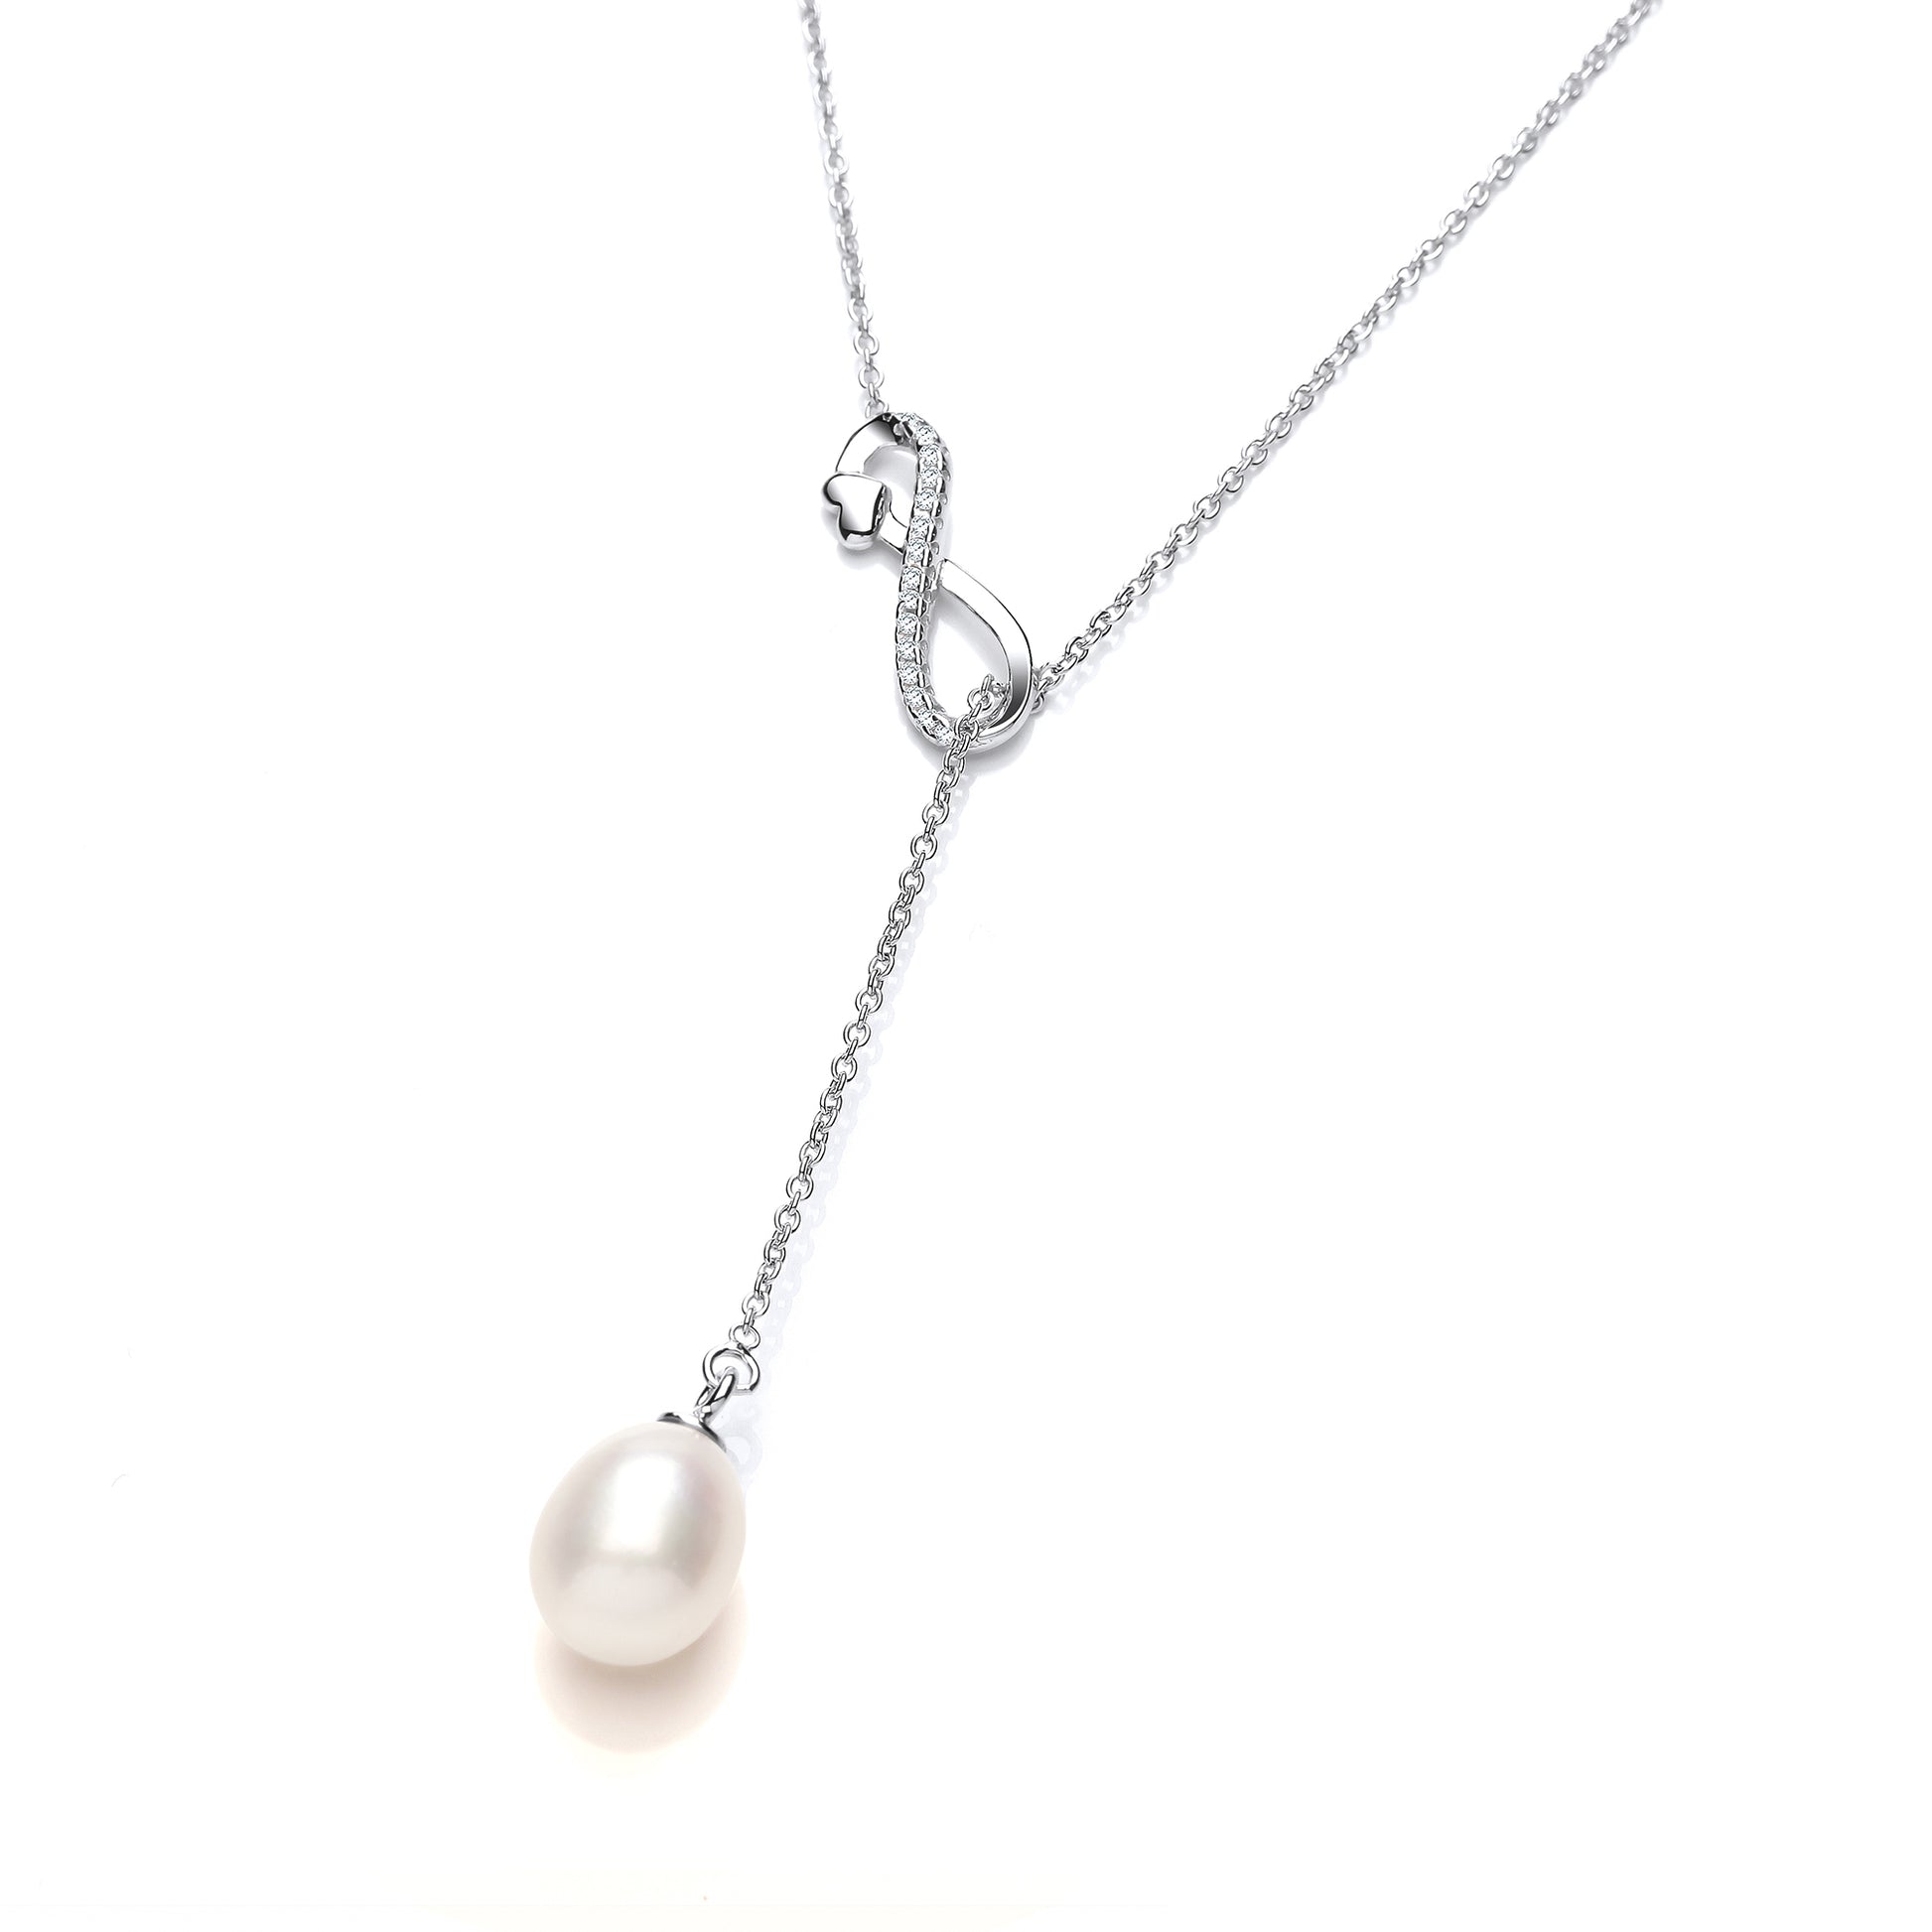 Silver  CZ Pearl Infinity Love Heart Lariat Necklace 9x11mm - GVK333